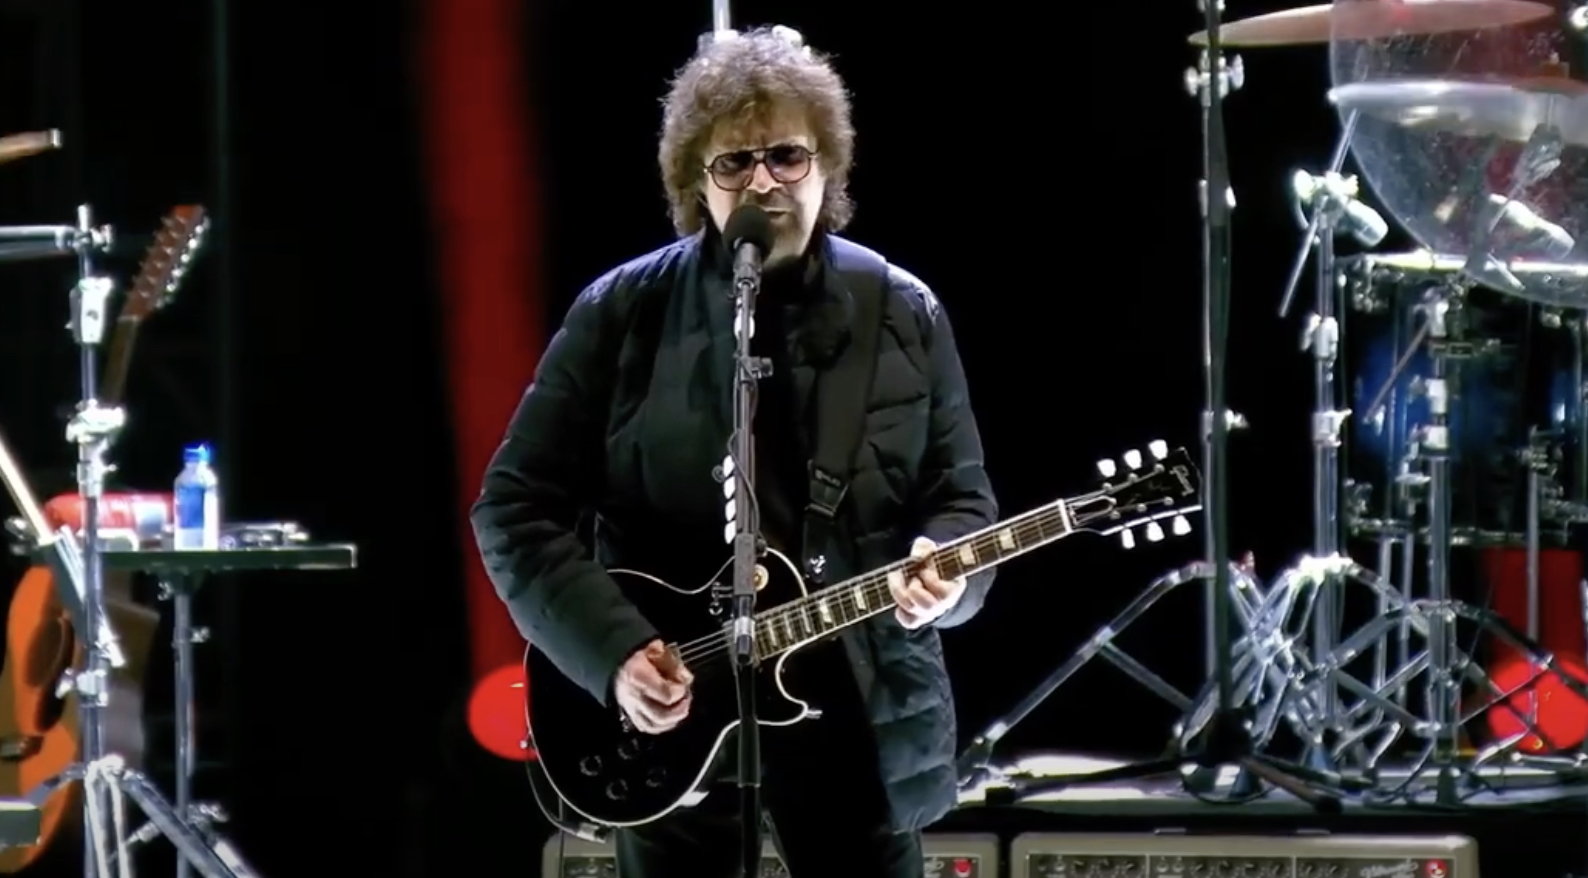 will jeff lynne ever tour again